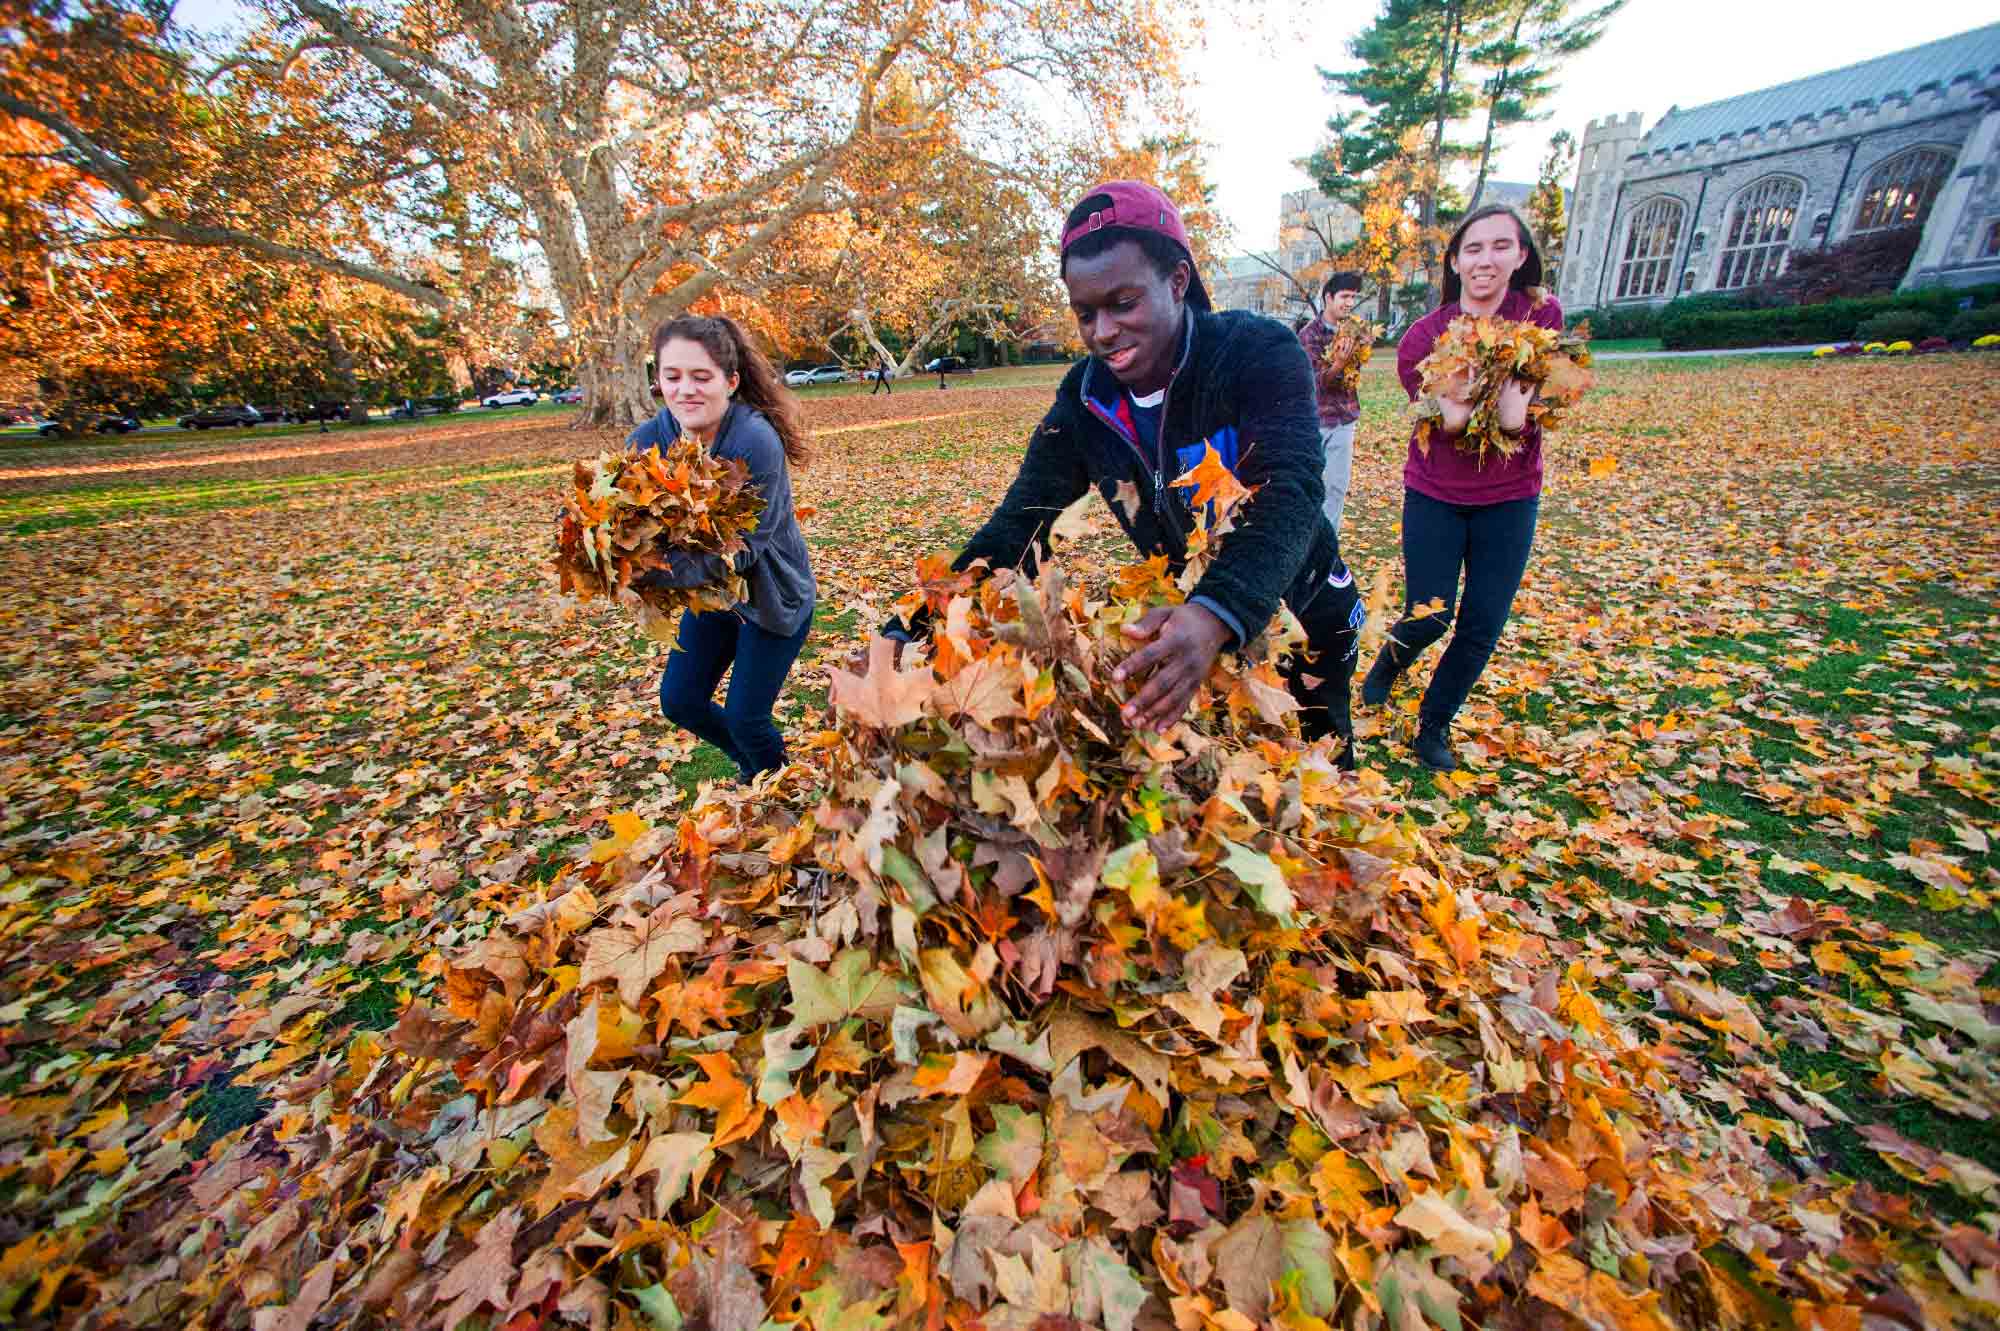 Students playing with a pile leaves on the library lawn, smiling